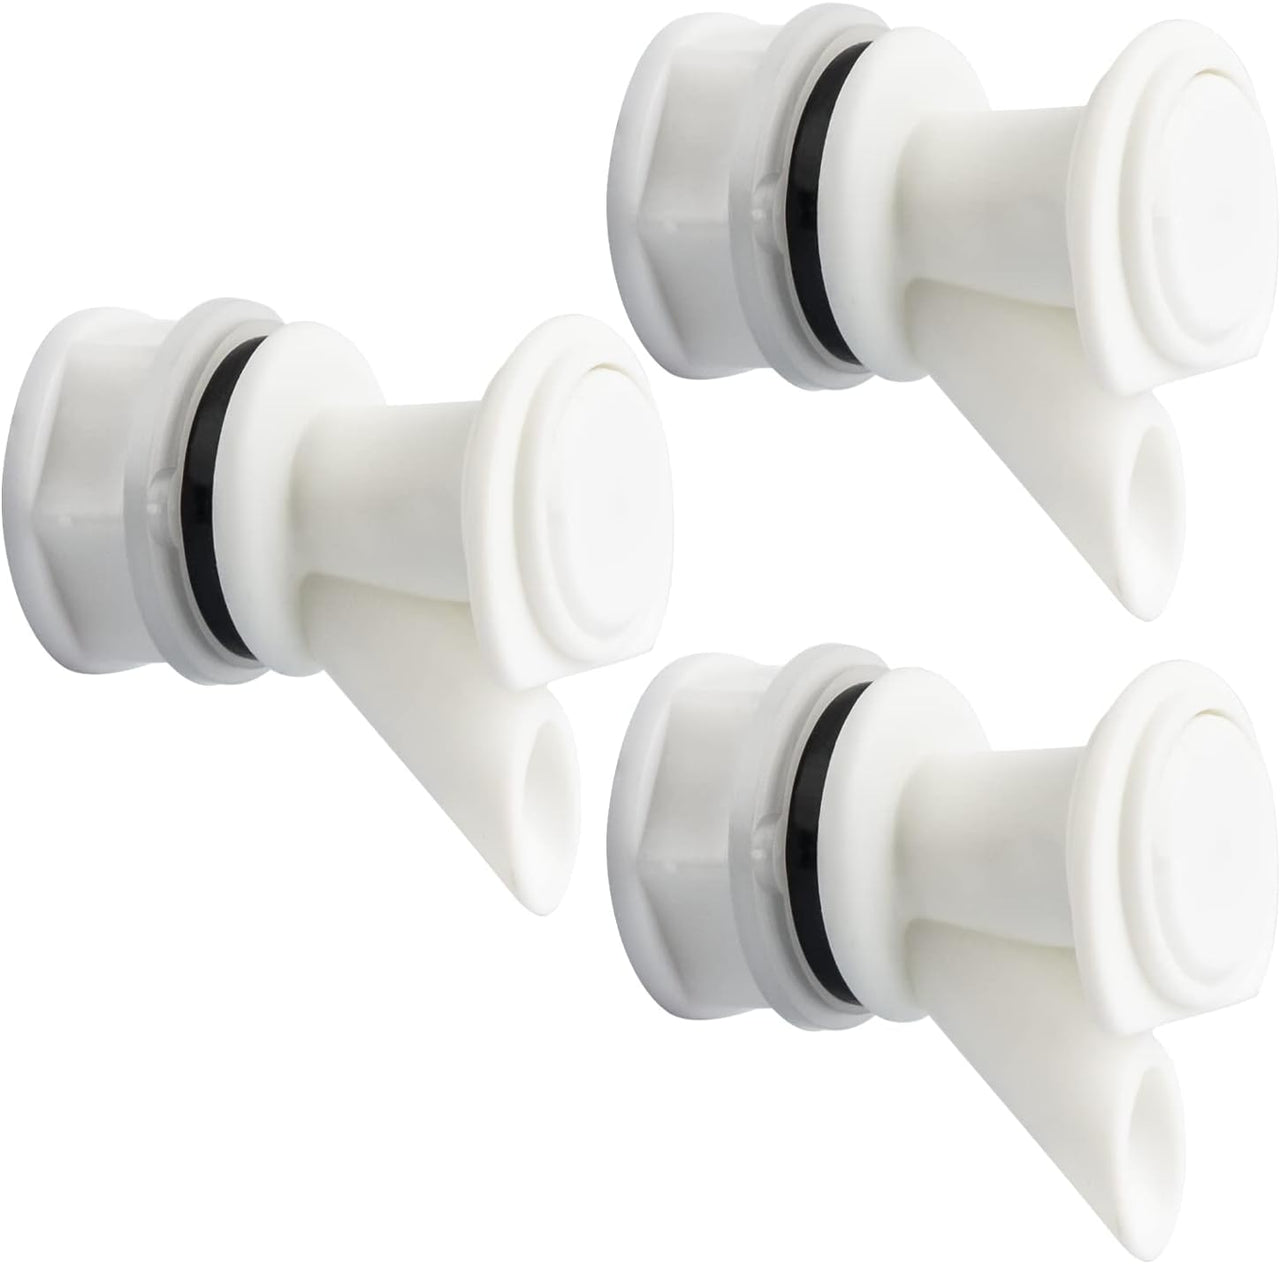 Push-Button Spigot Cooler Spigot Replacement. Compatible with Igloo 2-10 Gallon Water Coolers. Durable Beverage Jugs Spigot (3 Pack)